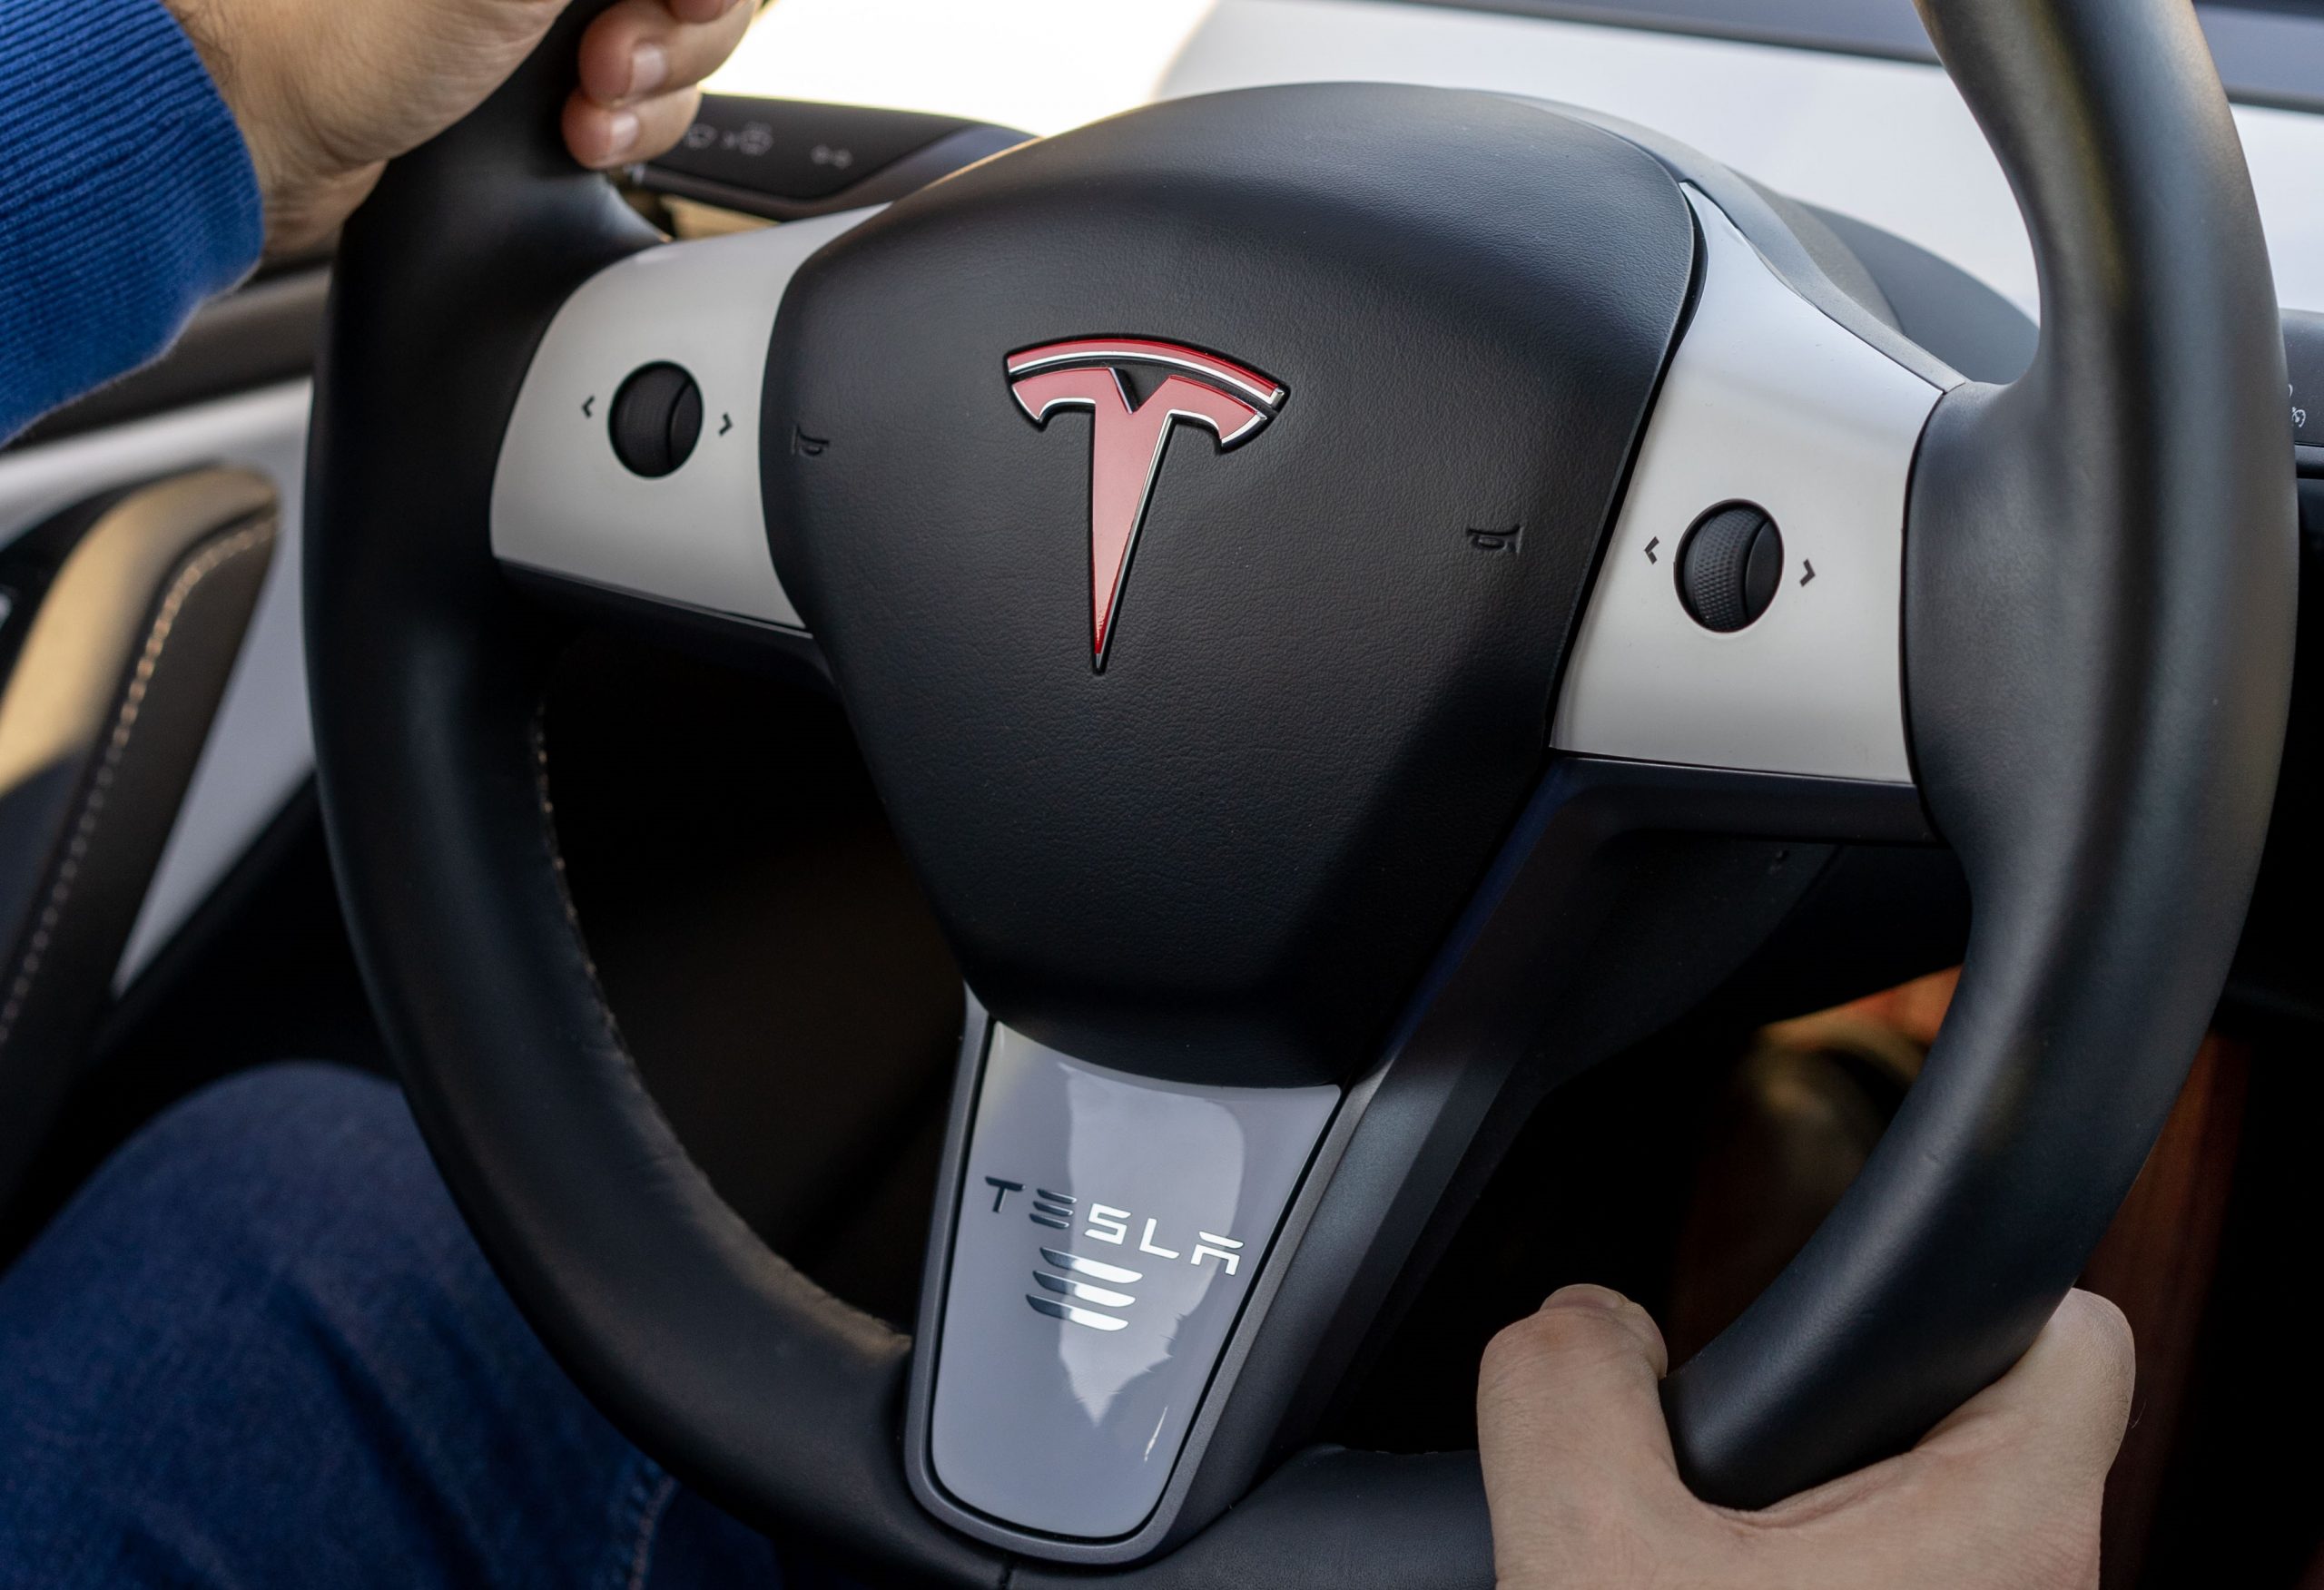 Murcia, Spain - DECEMBER 1, 2019: Young man is driving a Tesla car and is holding the steering wheel. The insignia of Tesla on the wheel of the plug-in electric car Model 3, a mid-size / compact executive luxury four-door sedan manufactured and sold by Tesla, Inc.